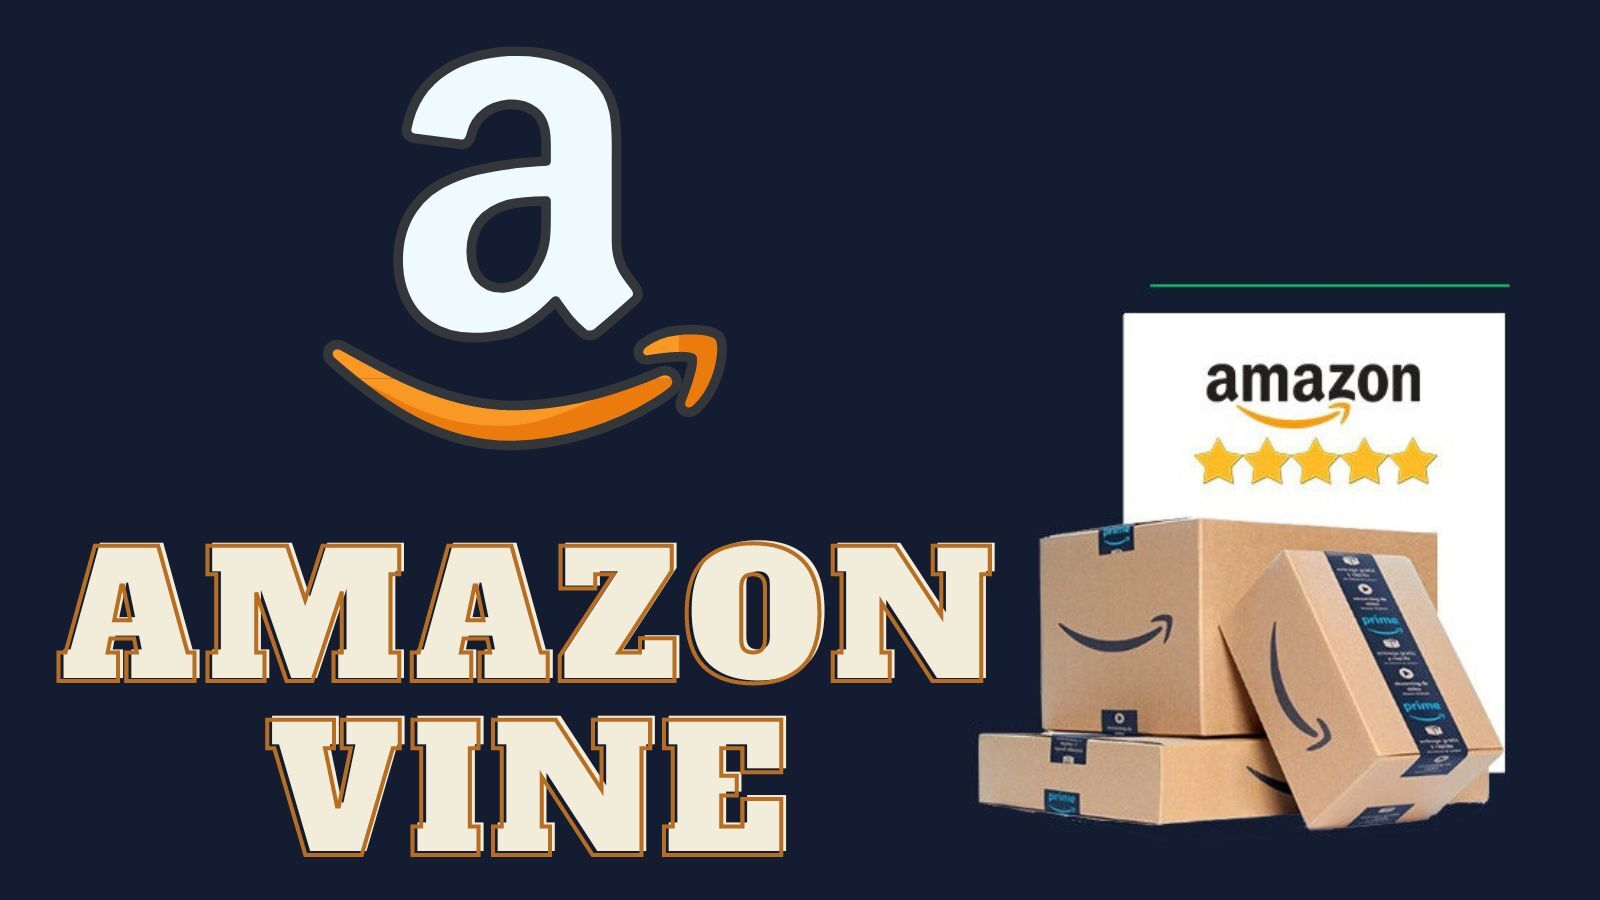 What Is Amazon Vine? (How It Works, Cost and Benefits)